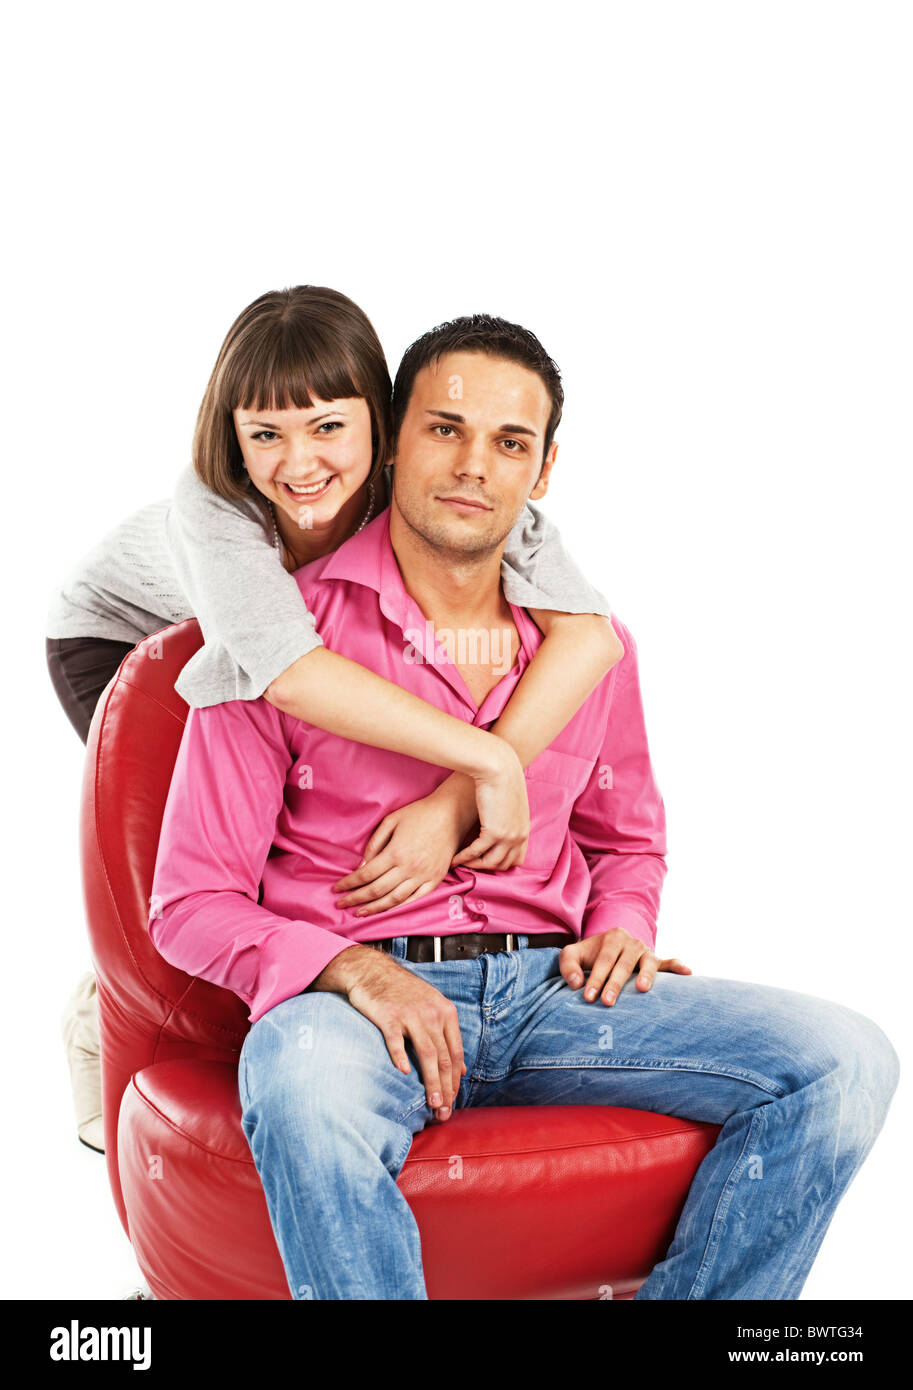 Happy young woman embraces man sitting on red leather chair Stock Photo